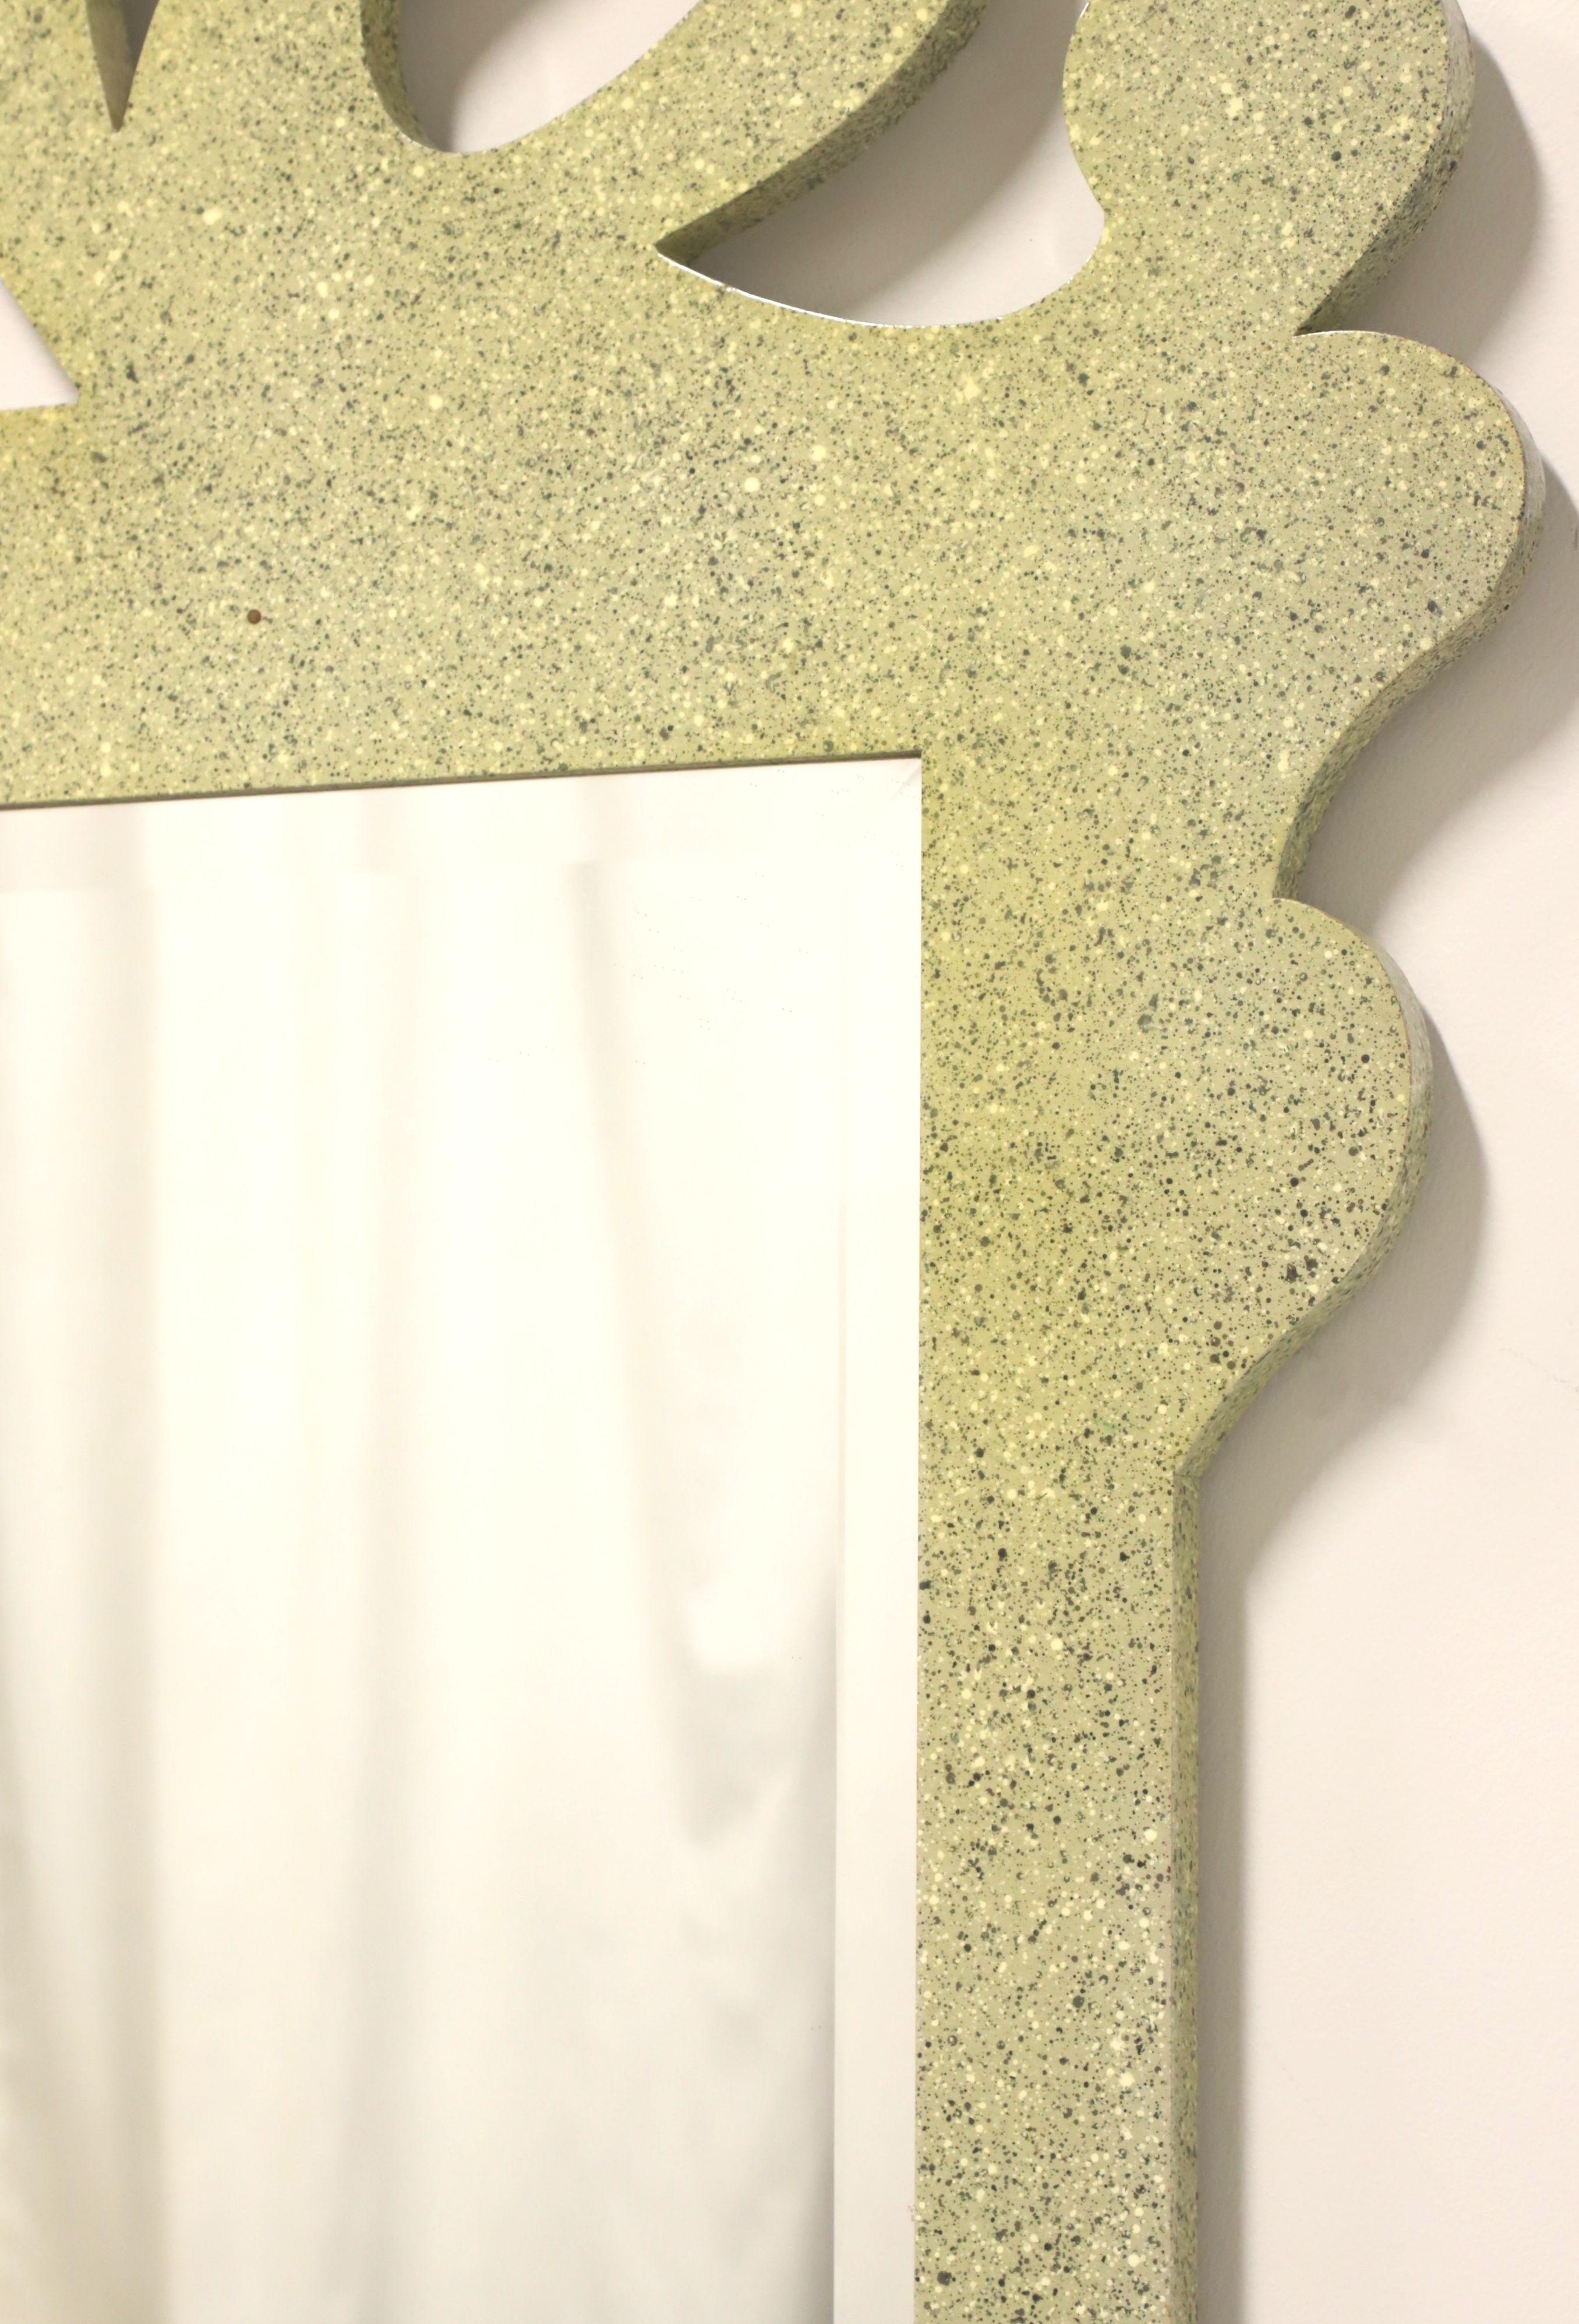 Mid 20th Century Italian Art Deco Green Speckled Beveled Wall Mirror For Sale 1